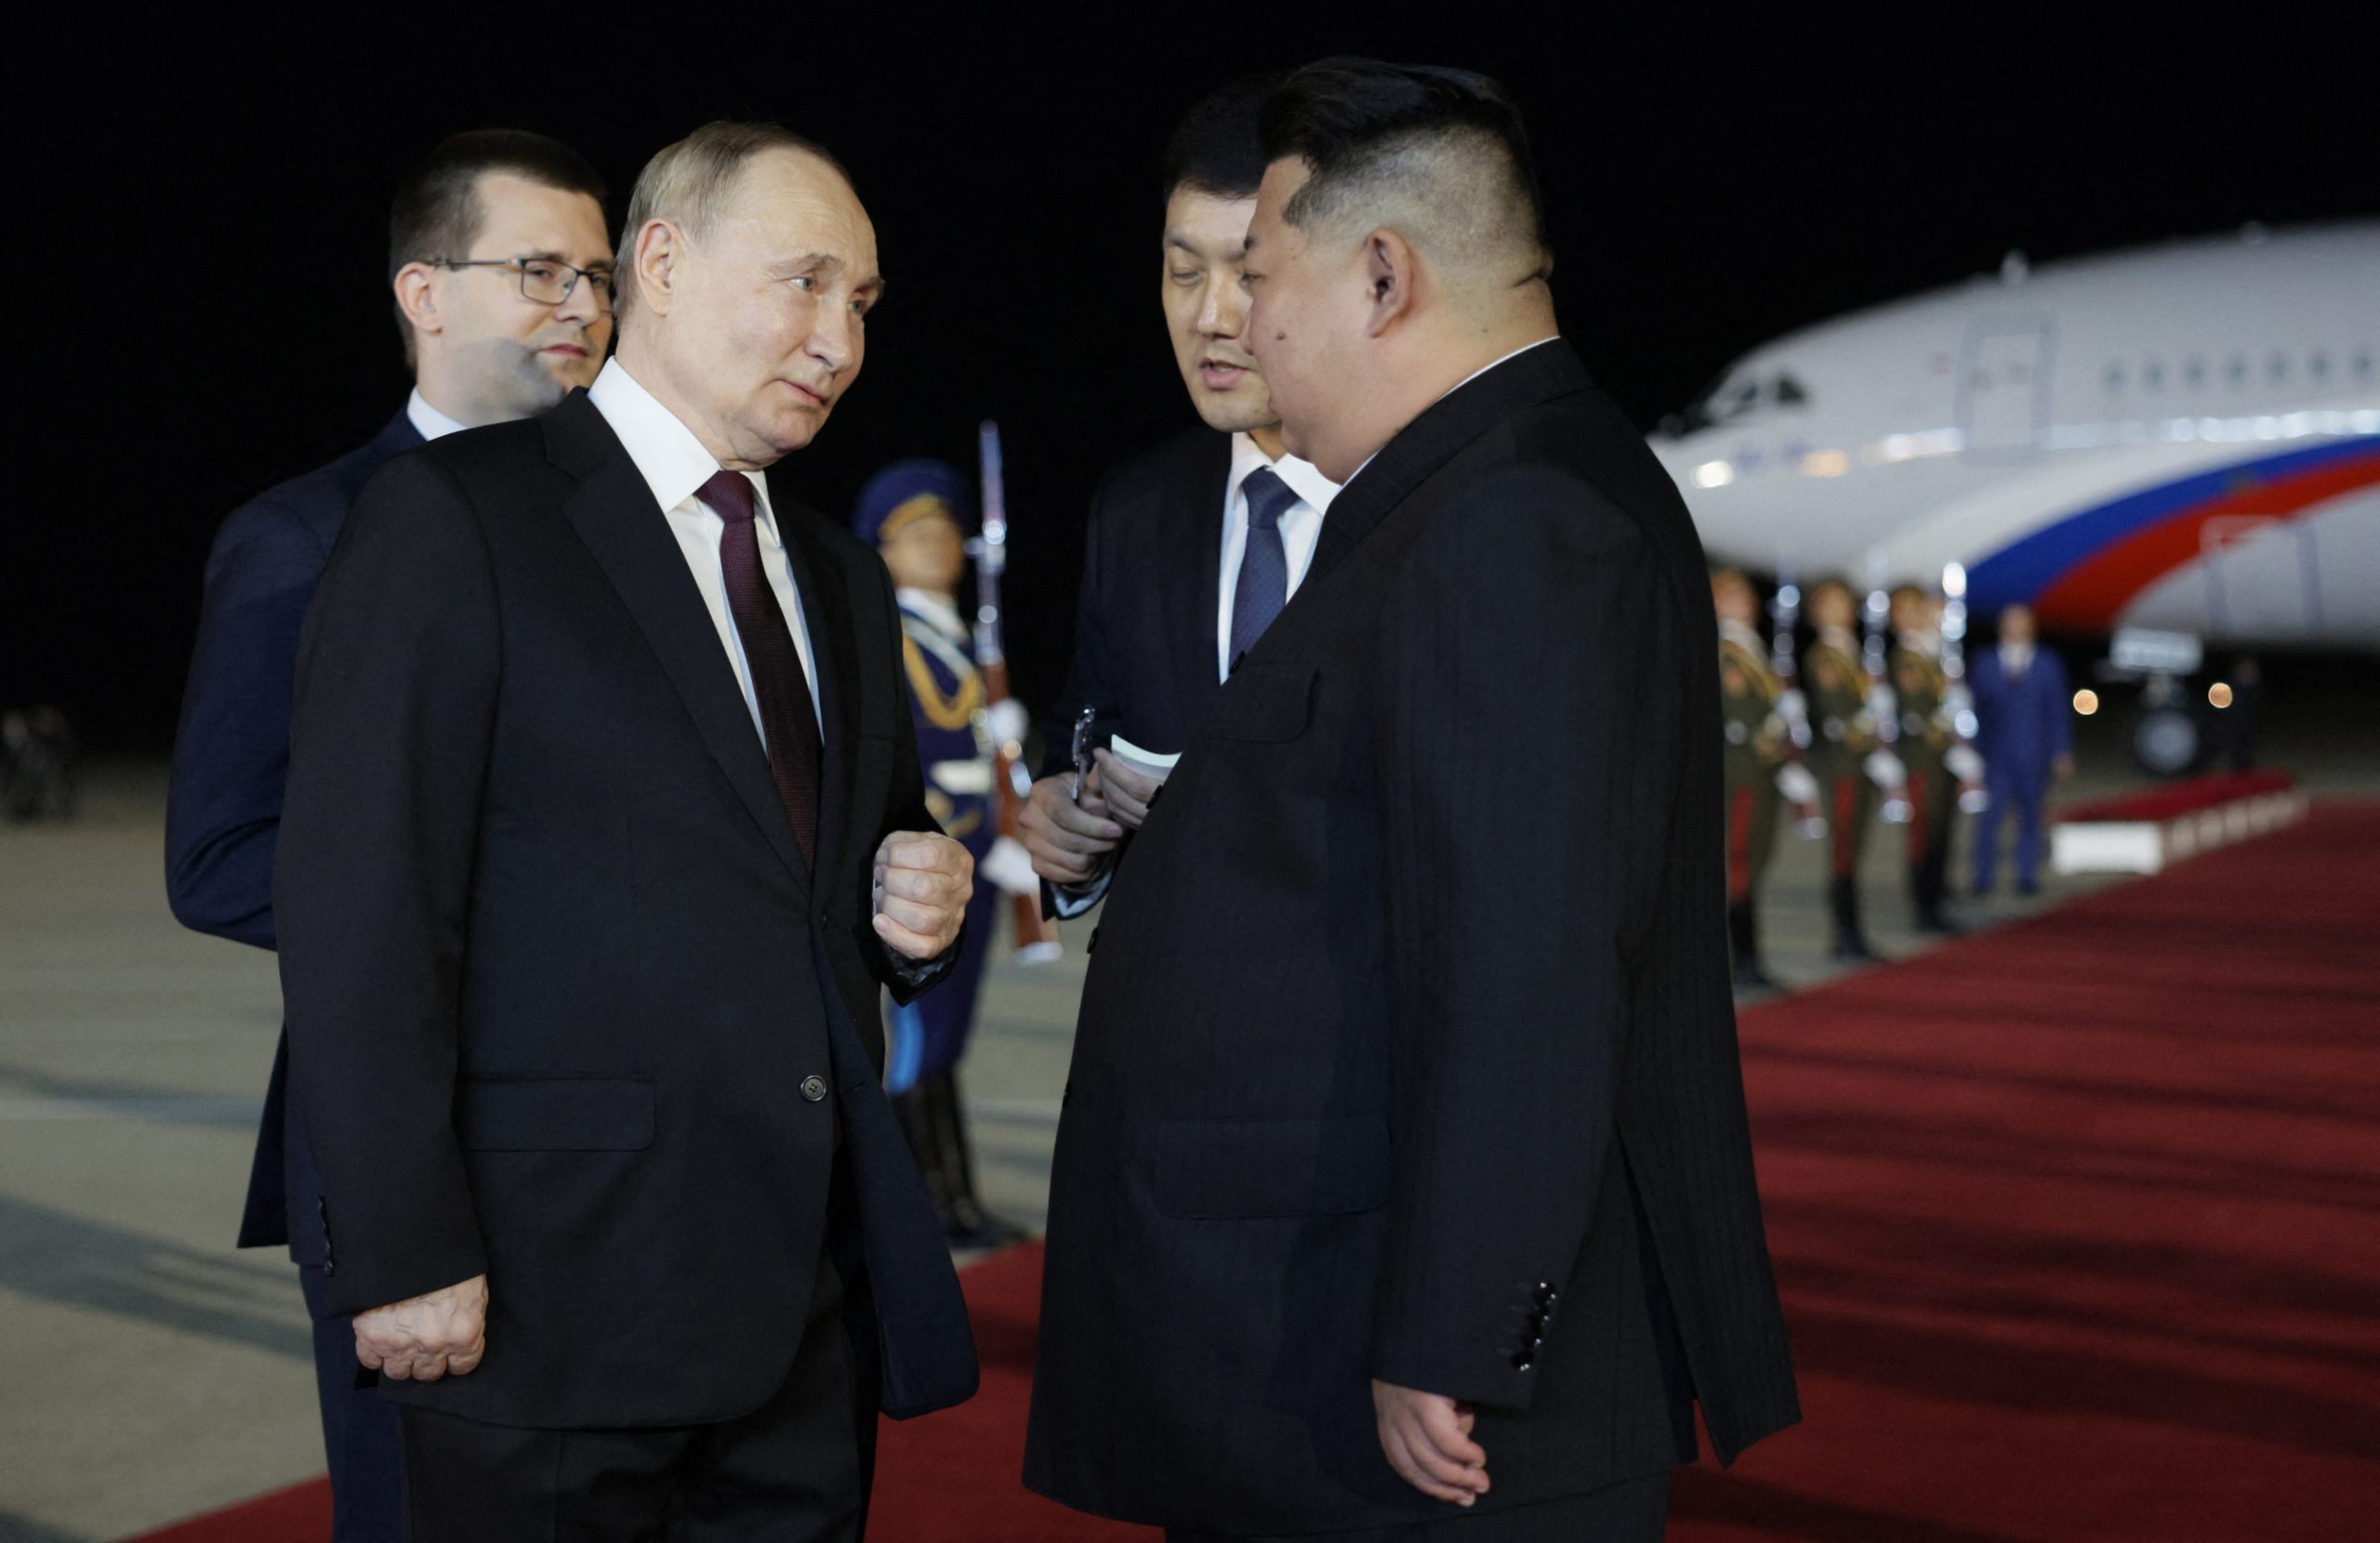 In this pool photograph distributed by the Russian state agency Sputnik, North Korea's leader Kim Jong Un (R) greets Russian President Vladimir Putin during a welcoming ceremony upon Putin's arrival in Pyongyang, early on June 19, 2024. Russian President Vladimir Putin landed in North Korea early on June 19, the Kremlin said, kicking off a visit set to boost defence ties between the two nuclear-armed countries as Moscow pursues its war in Ukraine. GAVRIIL GRIGOROV/POOL/AFP via Getty Images